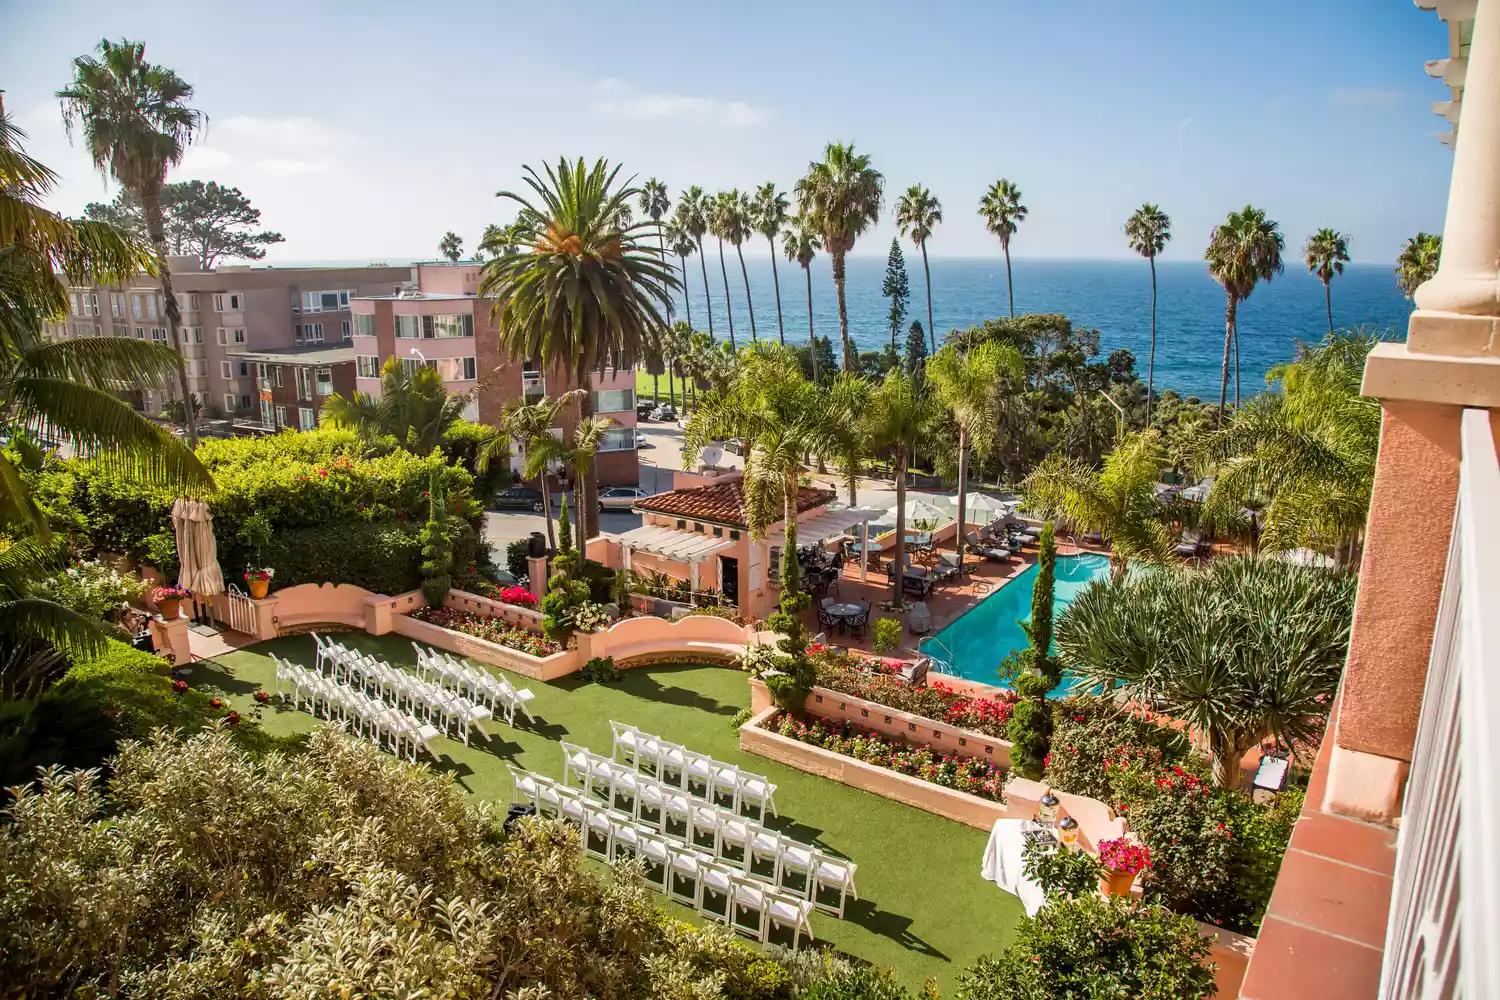 Aerial shot of wedding ceremony set-up at Hotel Valencia with ocean views, palm trees, and pool.